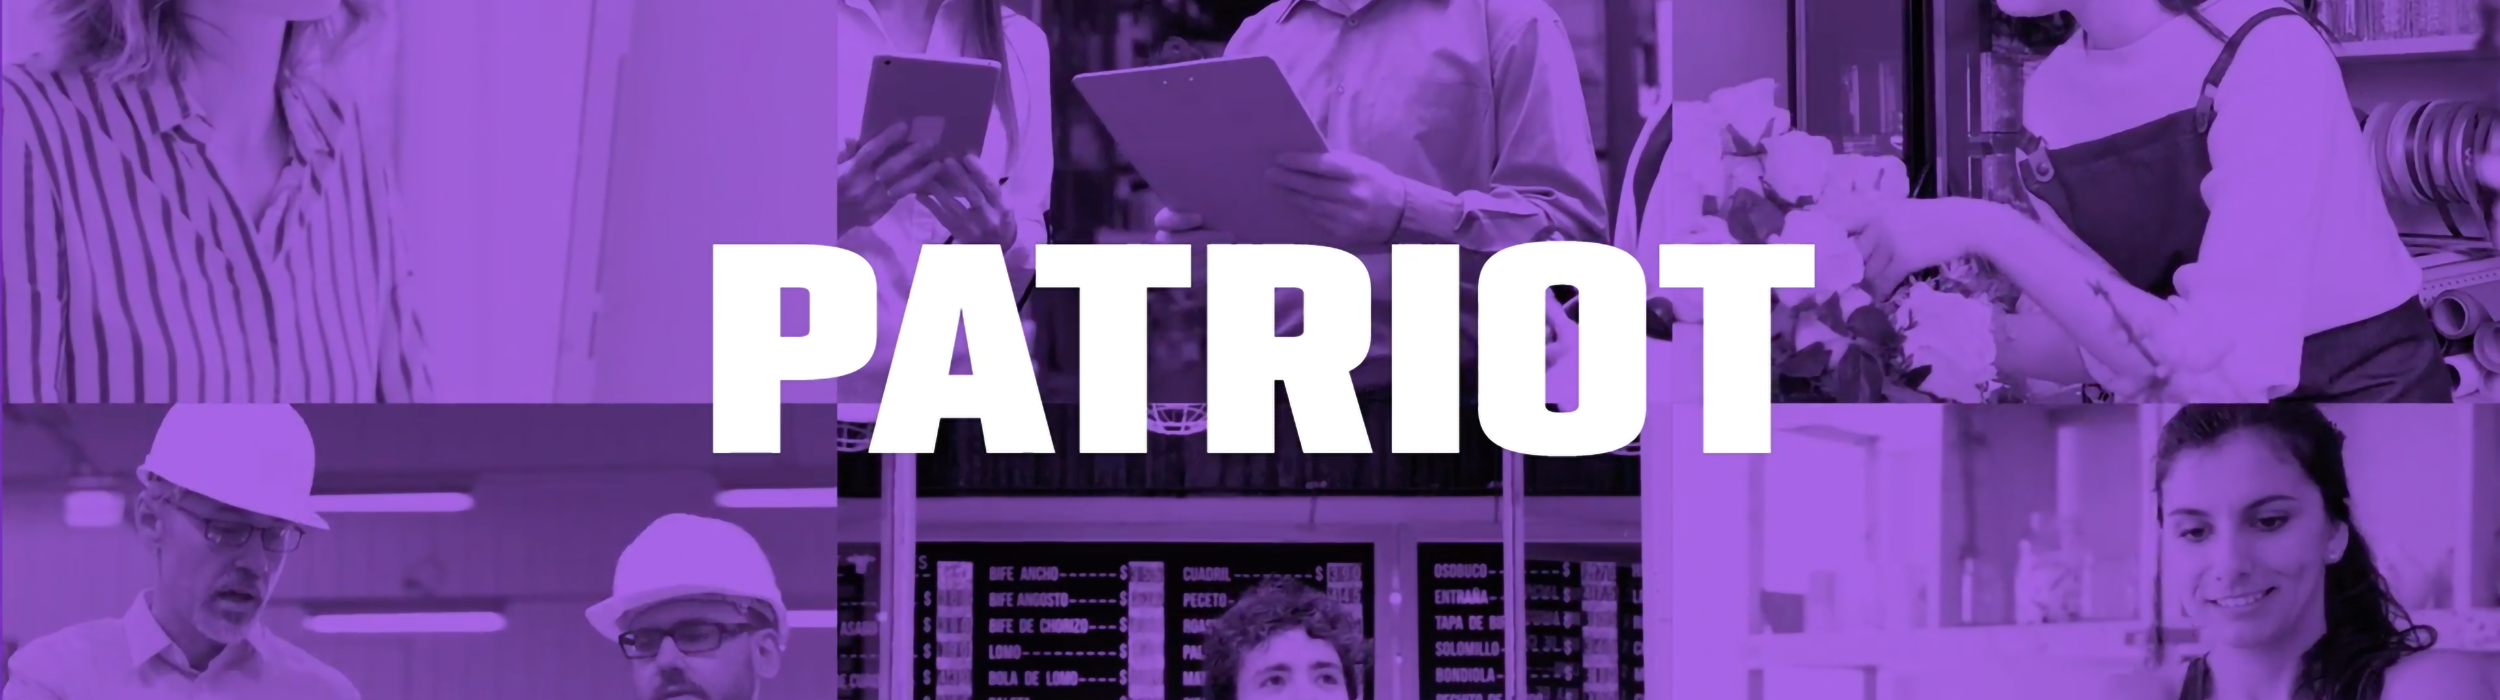 Patriot Software Turns to TV to Reach American Business Owners